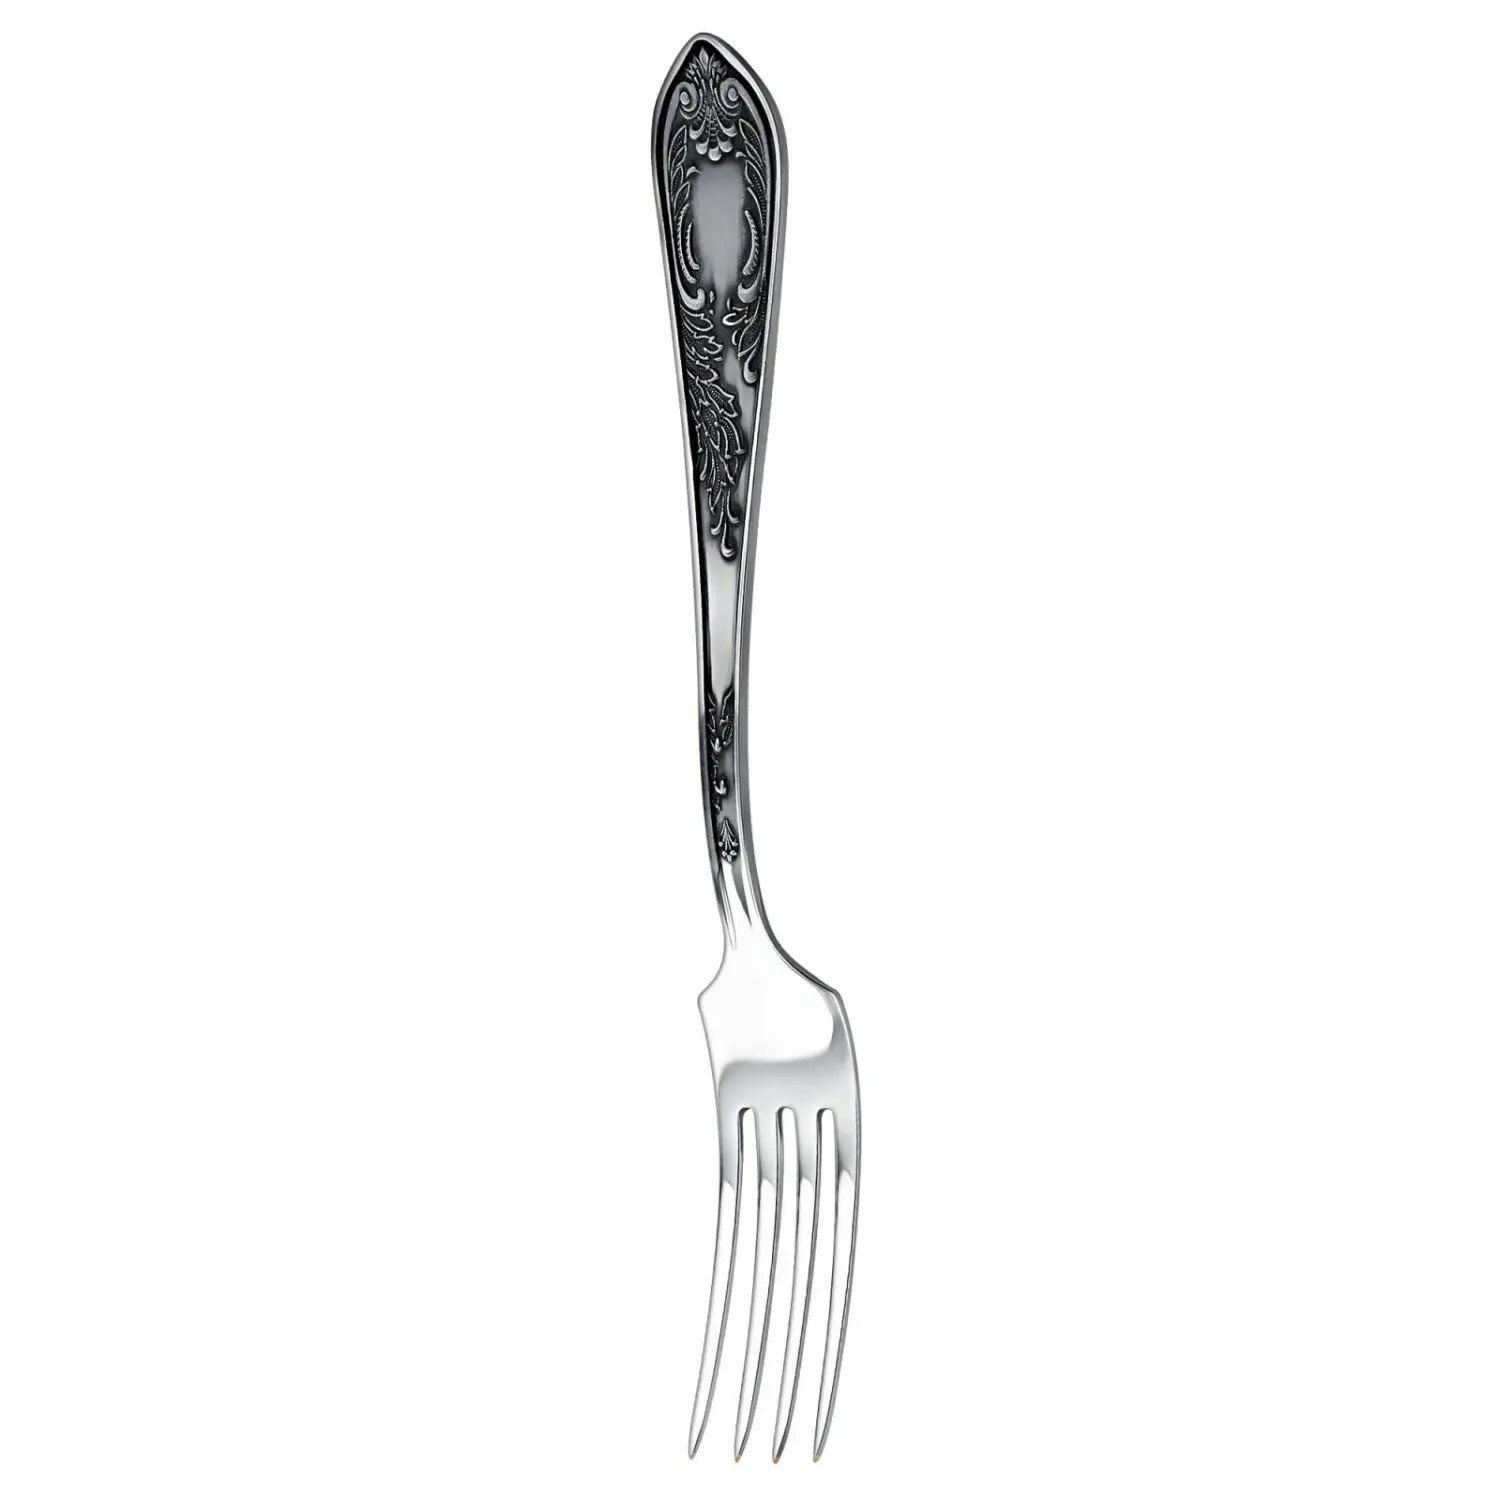 Nickel Silver table forks